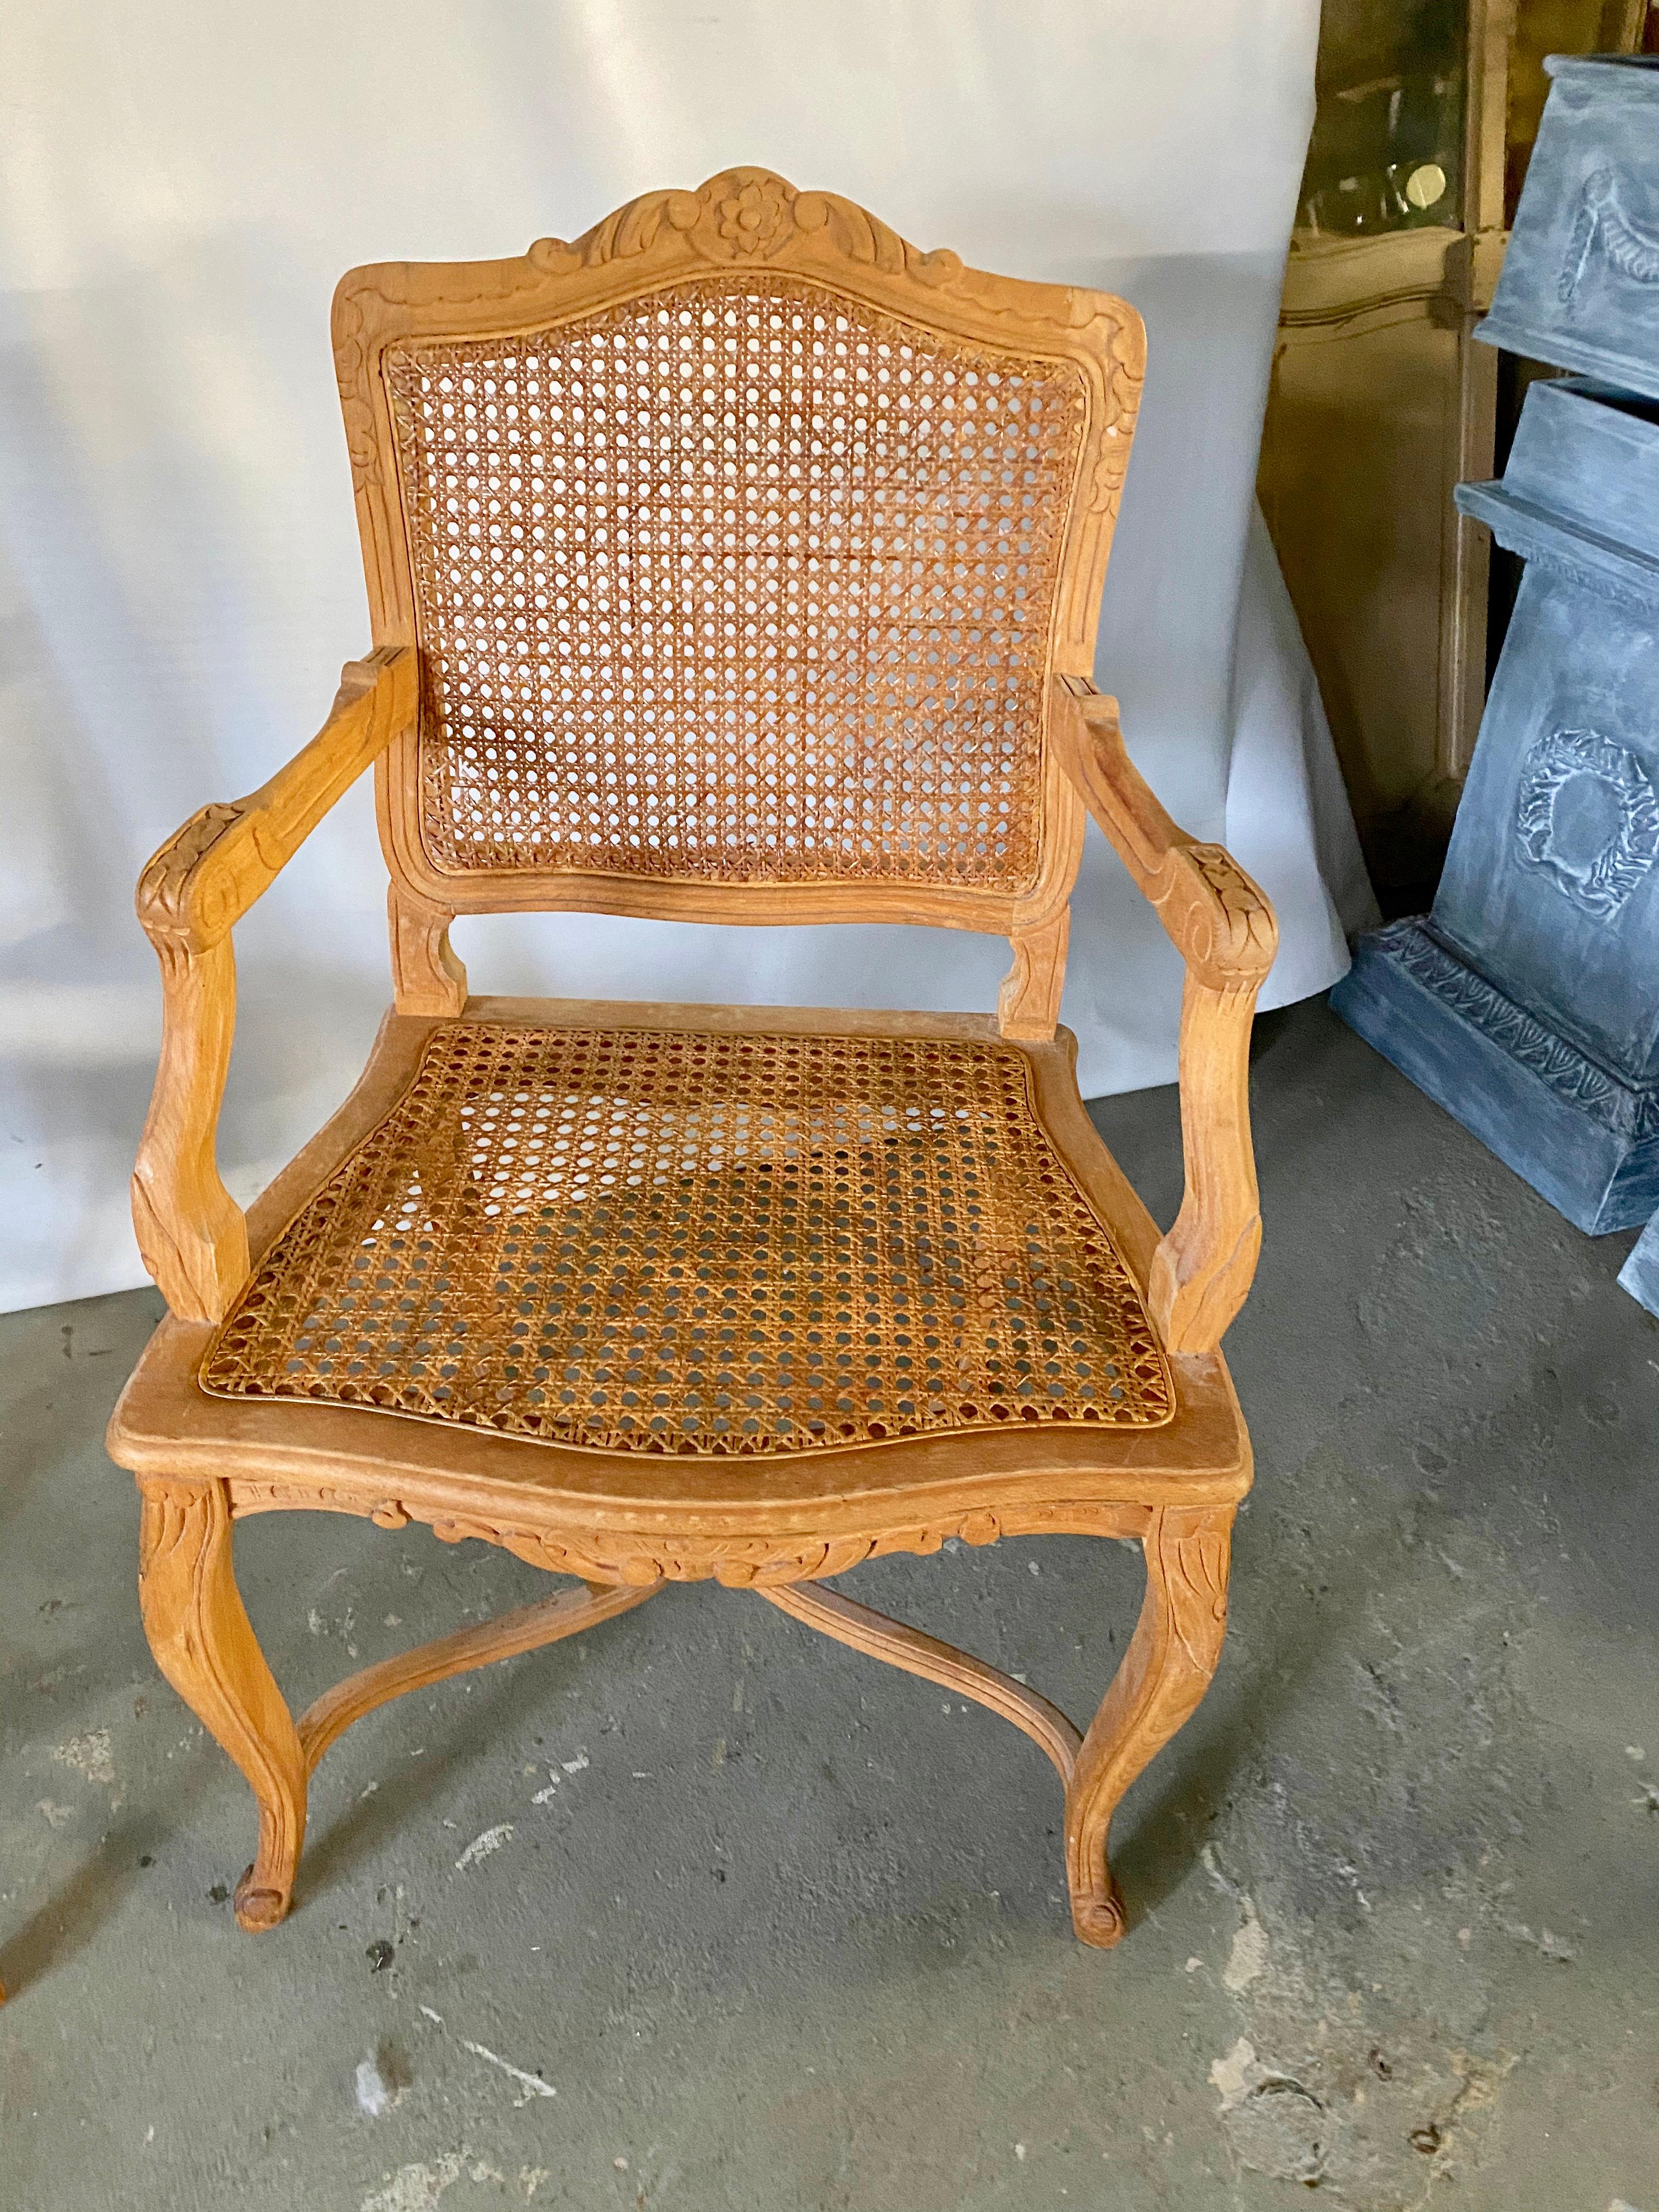 Two antique French country carved pine caned back and seat chairs on cabriole legs, with chair front and crest rail carved with flower and scroll design. The one armchair and one side chair can be sold separately. Both will work well as extra